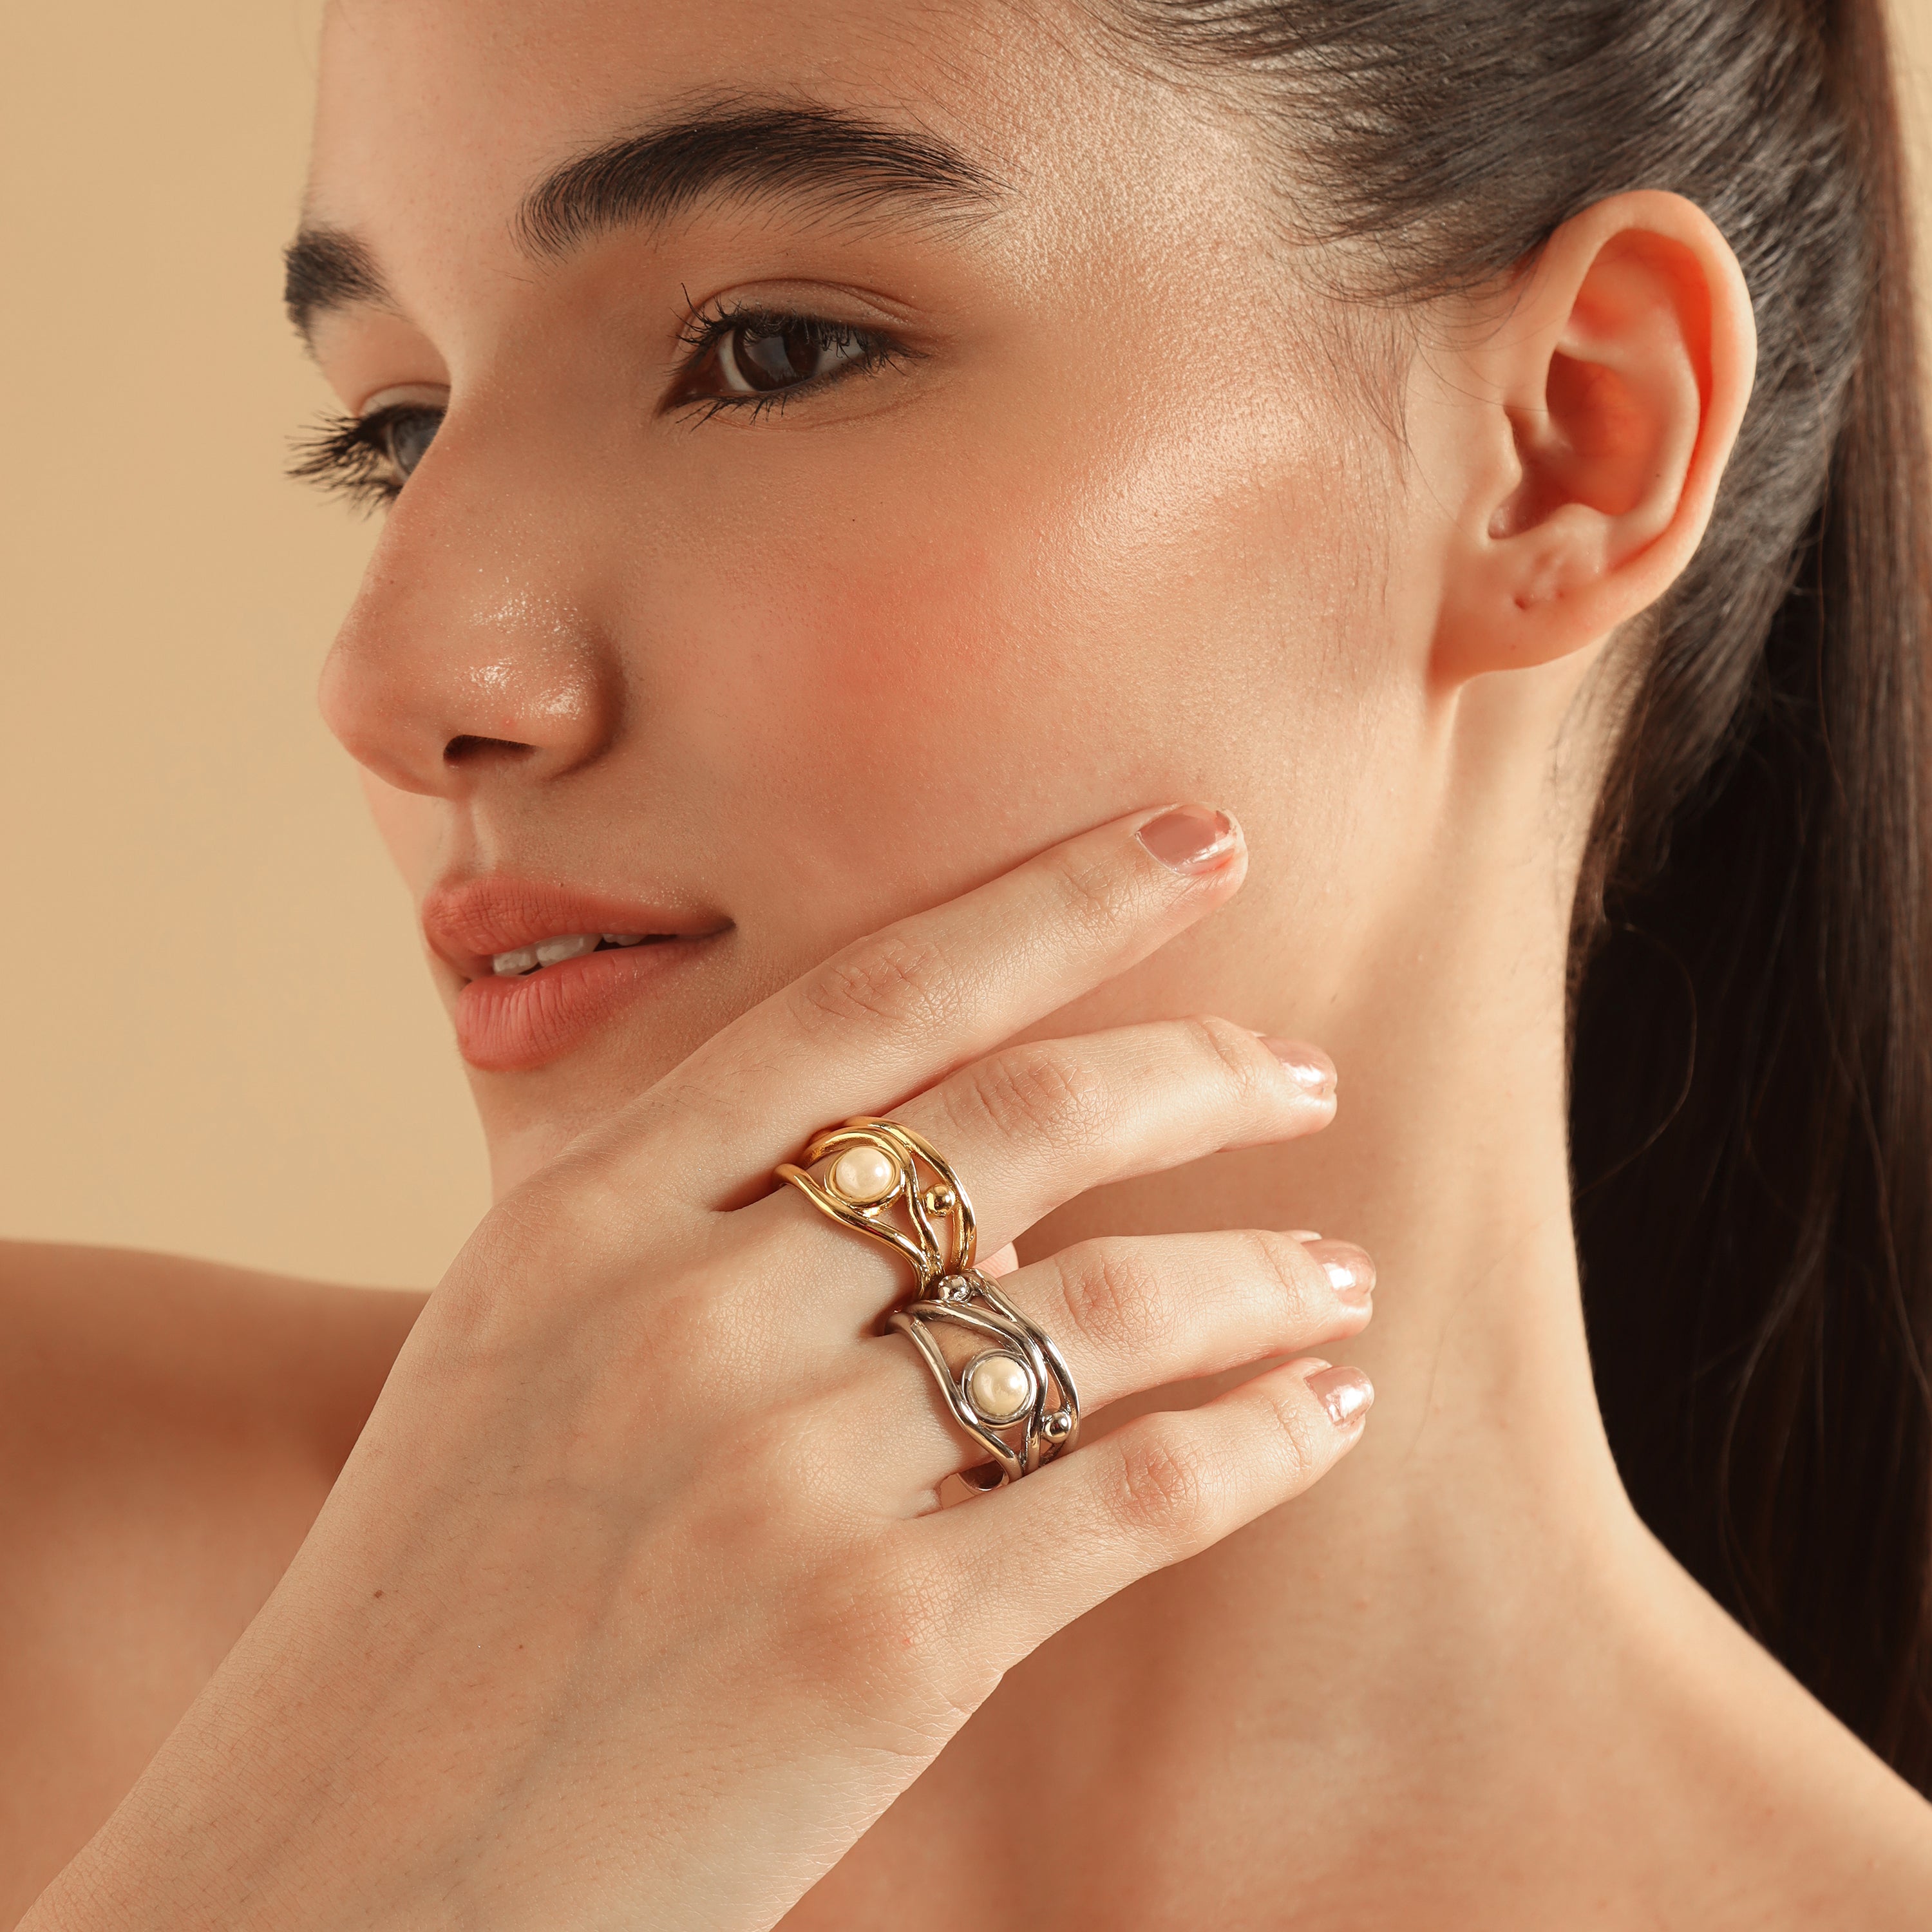 TFC Margalo Silver Plated Adjustable Ring- Elevate your style with our exquisite collection of gold-plated adjustable rings for women, including timeless signet rings. Explore cheapest fashion jewellery designs with anti-tarnish properties, all at The Fun Company with a touch of elegance